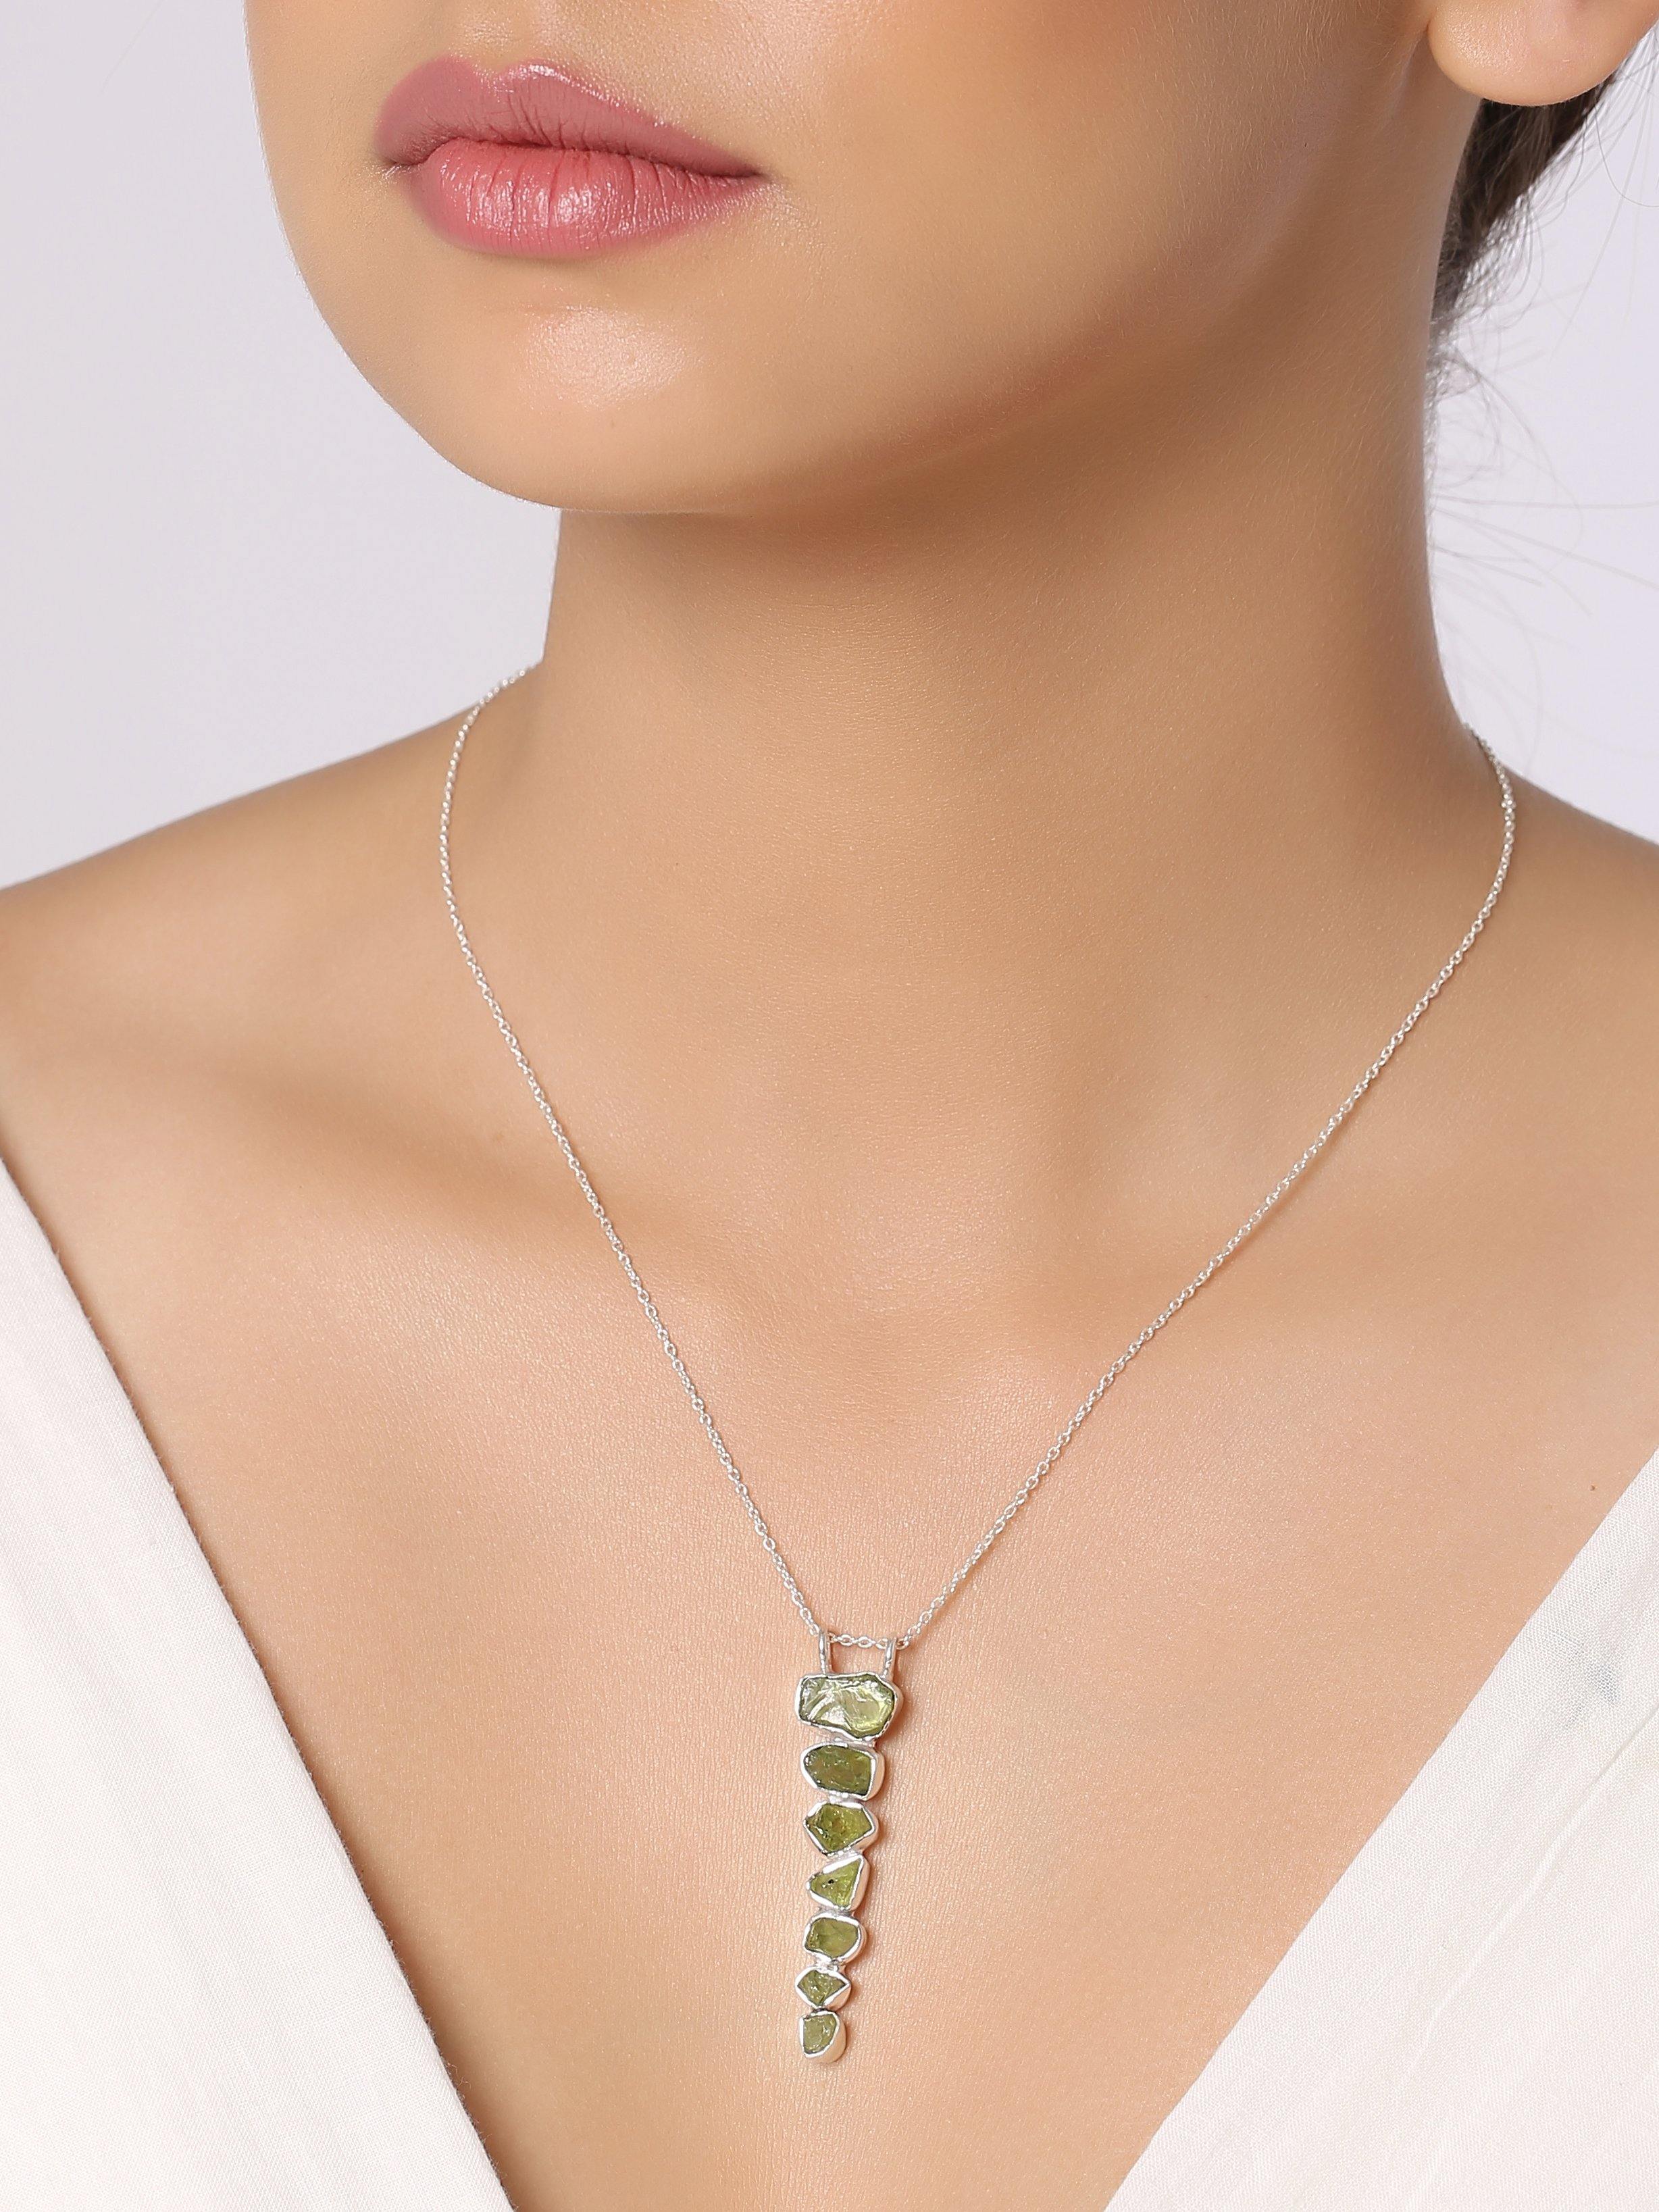 Rough Peridot Solid 925 Sterling Silver Pendant with 18 Inch Chain Necklace Jewelry - YoTreasure